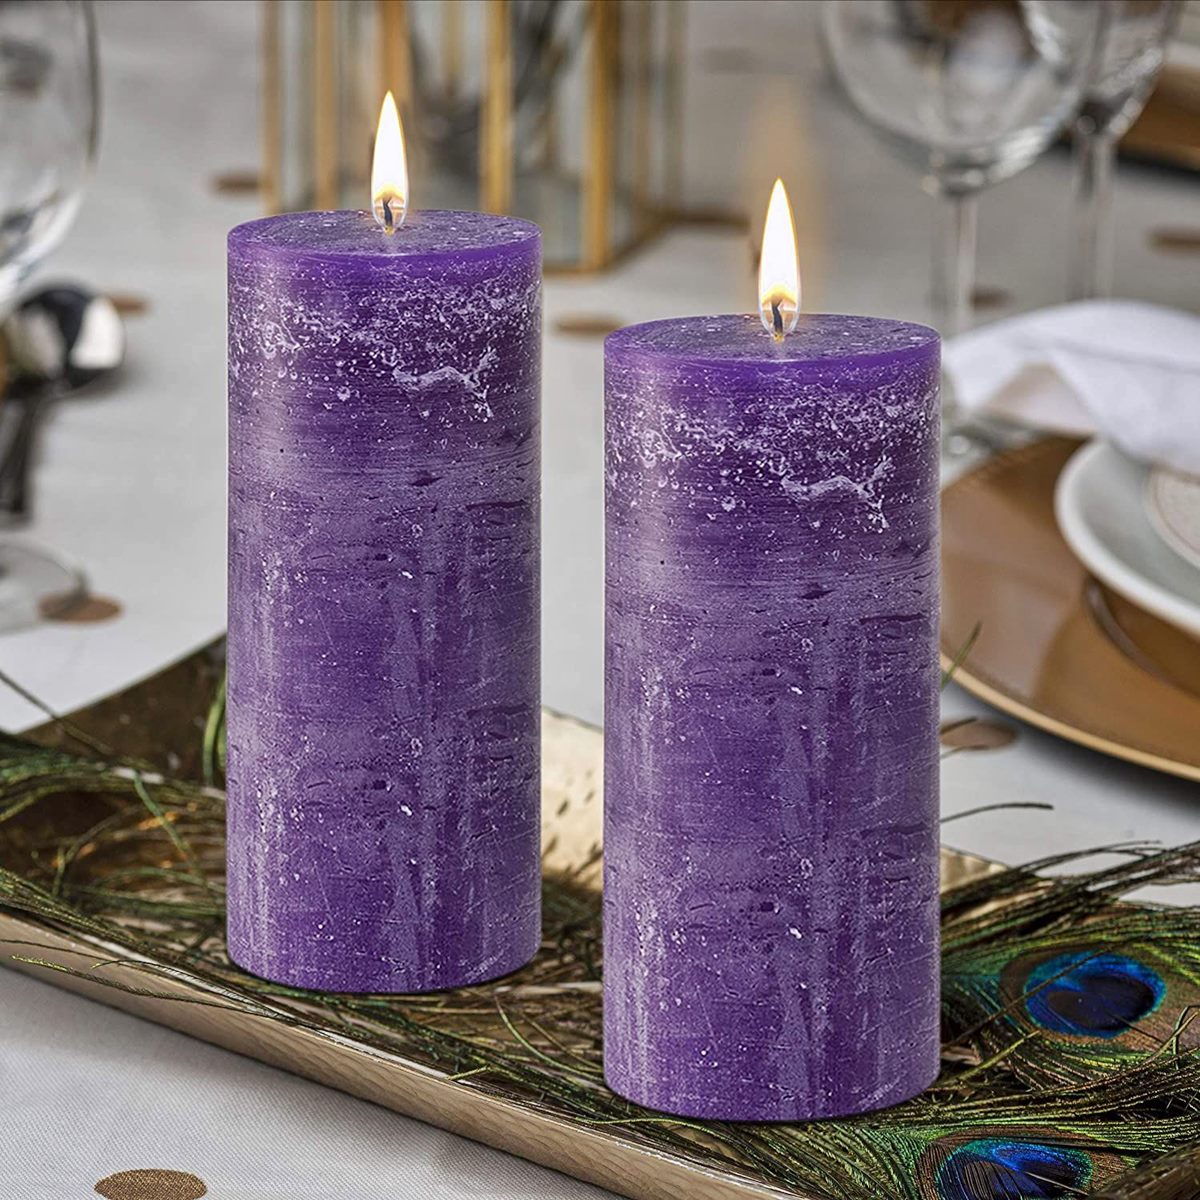 What Does Purple Candle Mean